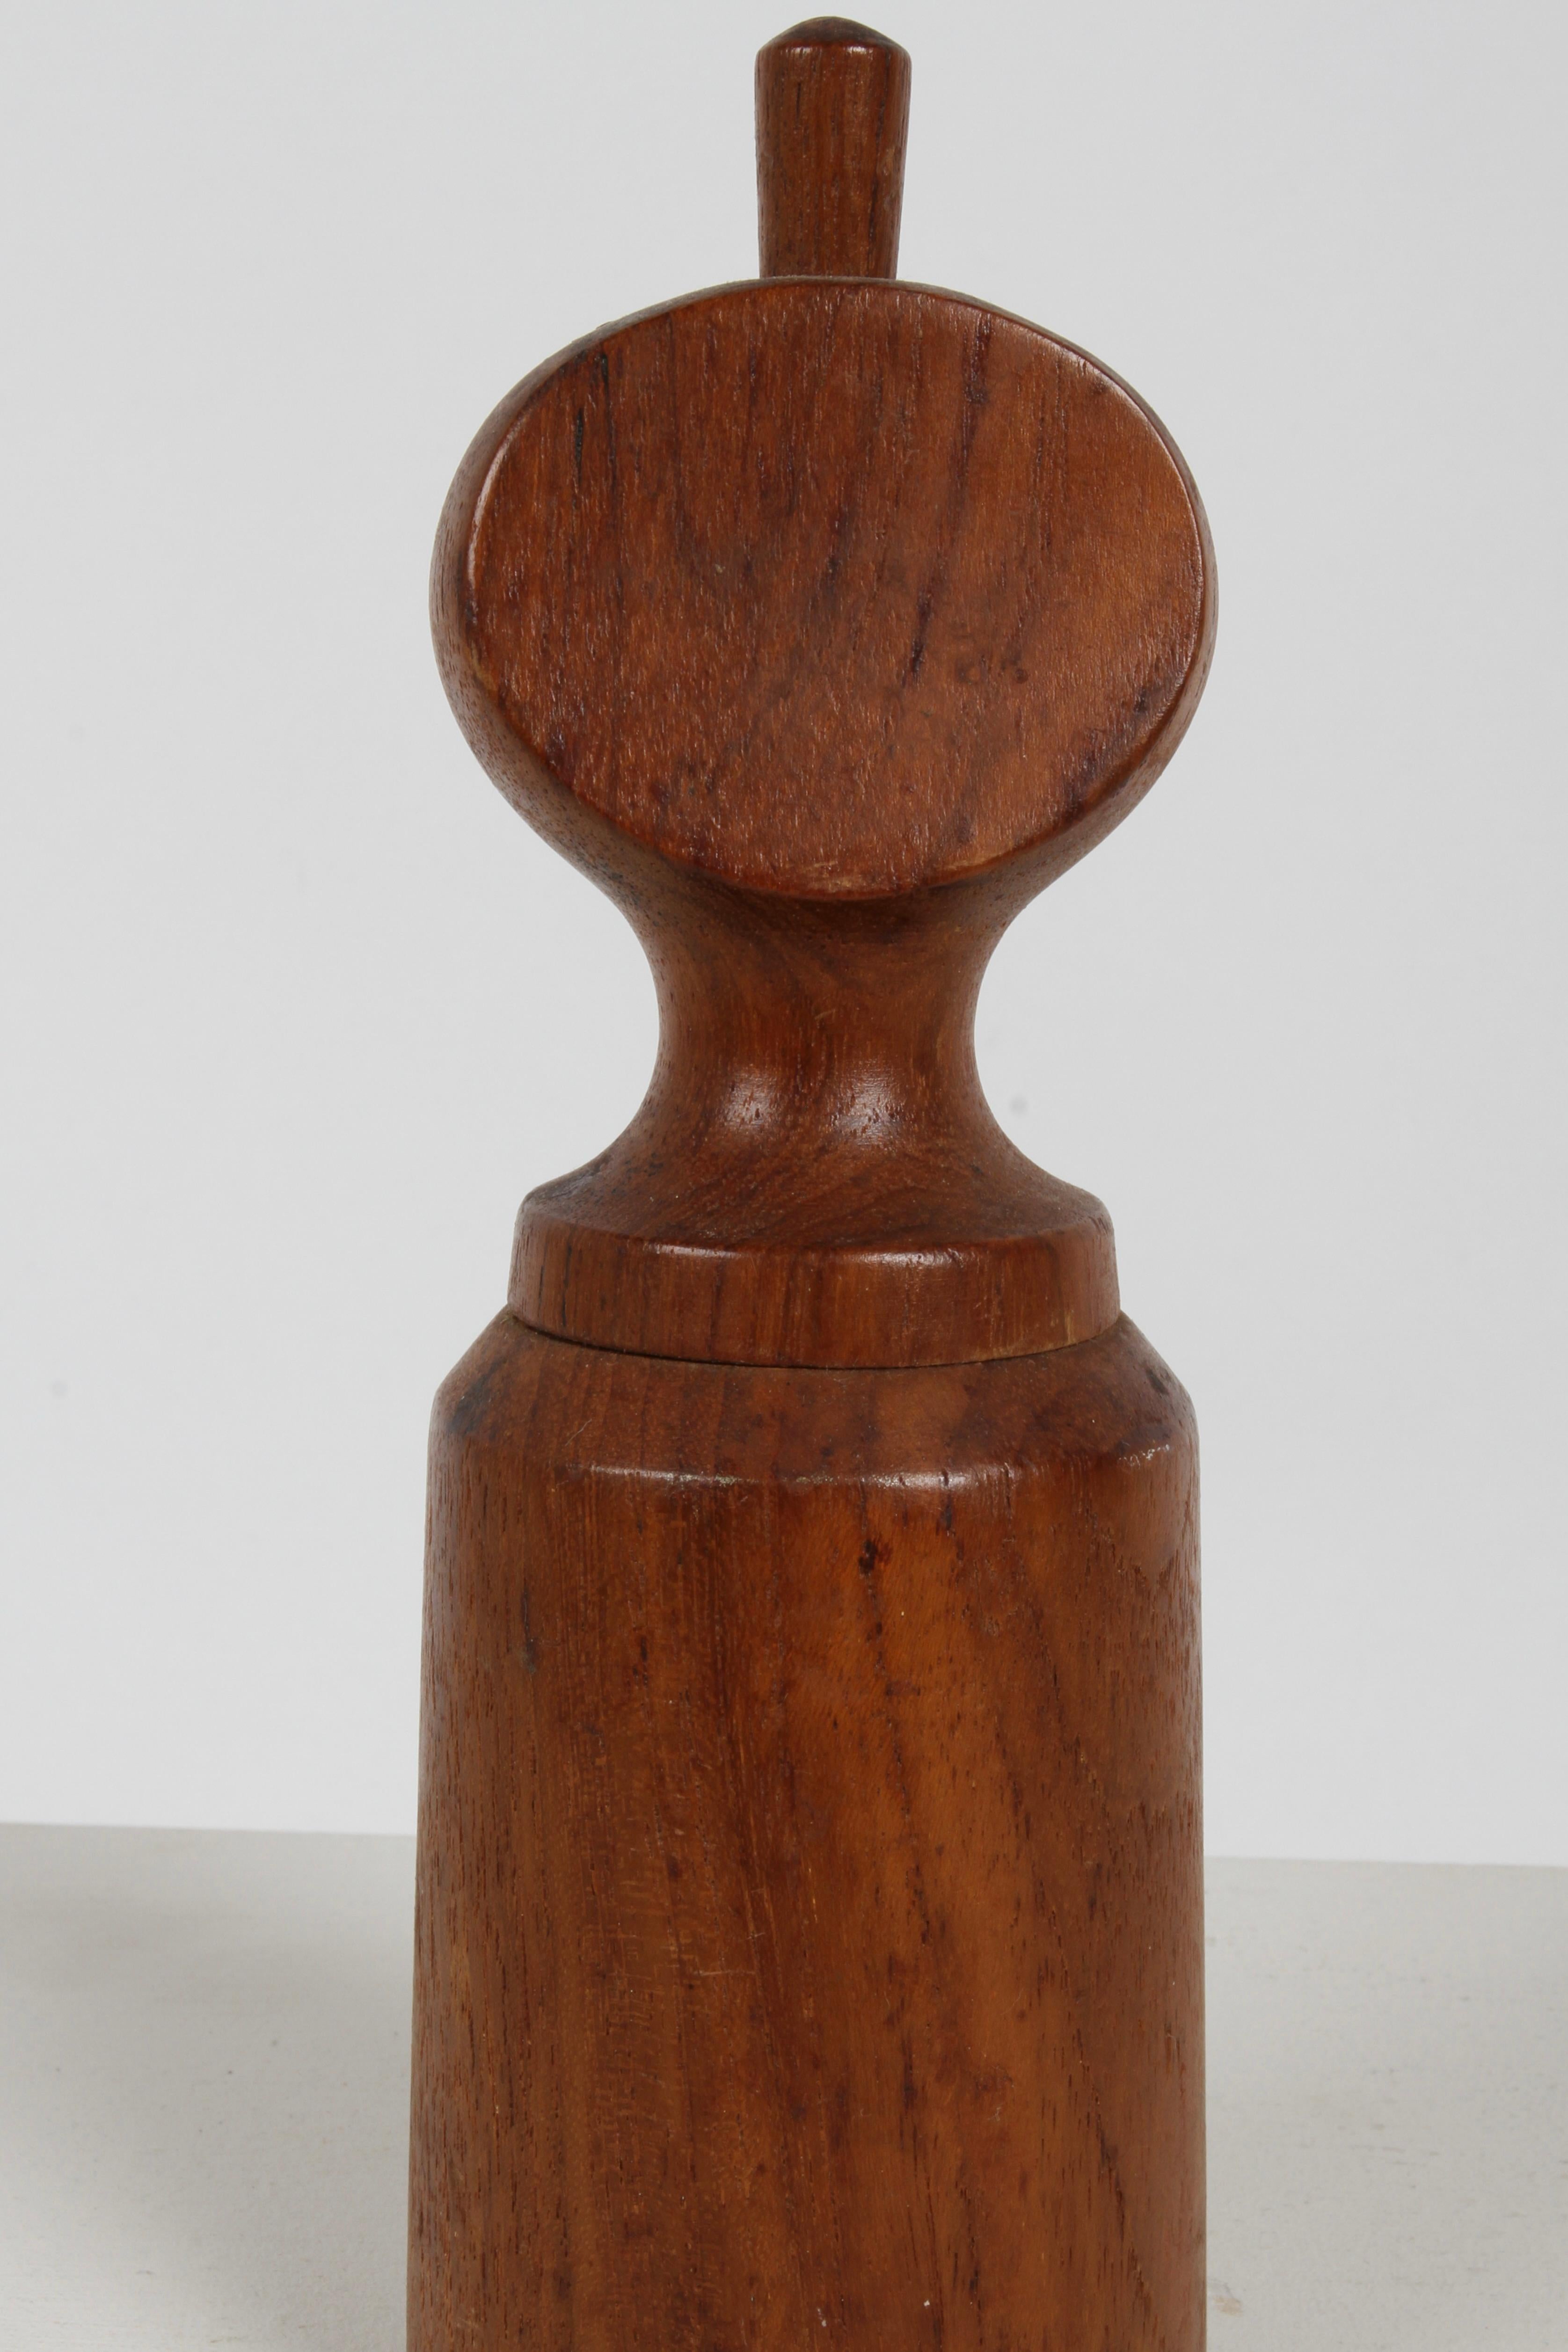 A 1960s Danish Modern Jens Quistgaard Salt & peppermill made of teak, in the style of a chess piece. Stamped Dansk Designs Ltd Denmark JHQ. Nice original condition. 

Ground pepper comes out of the bottom when cylinder turns and salt sprinkles from